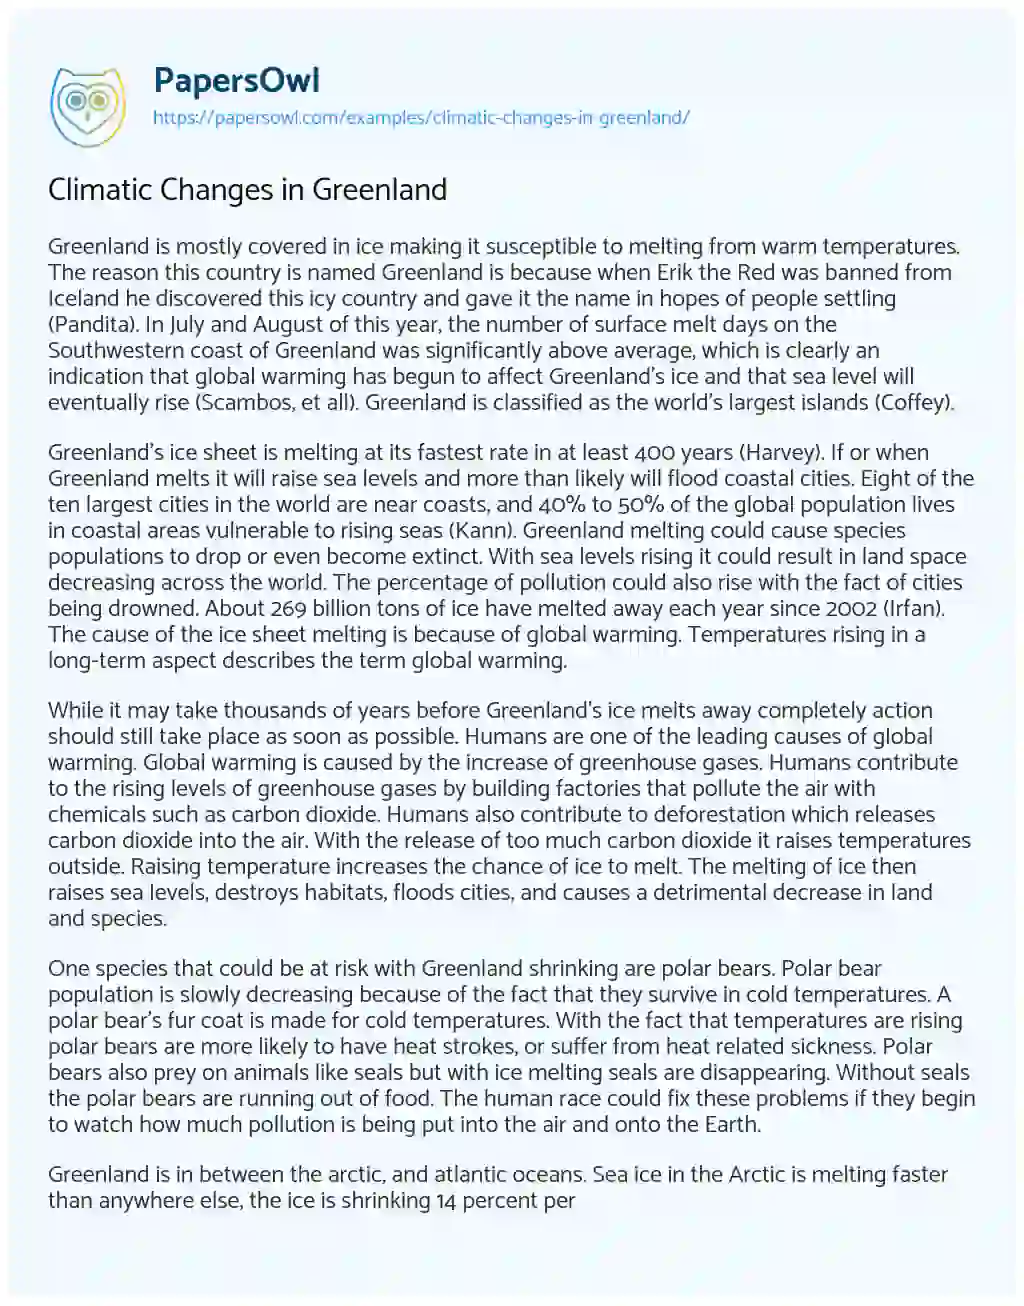 Essay on Climatic Changes in Greenland